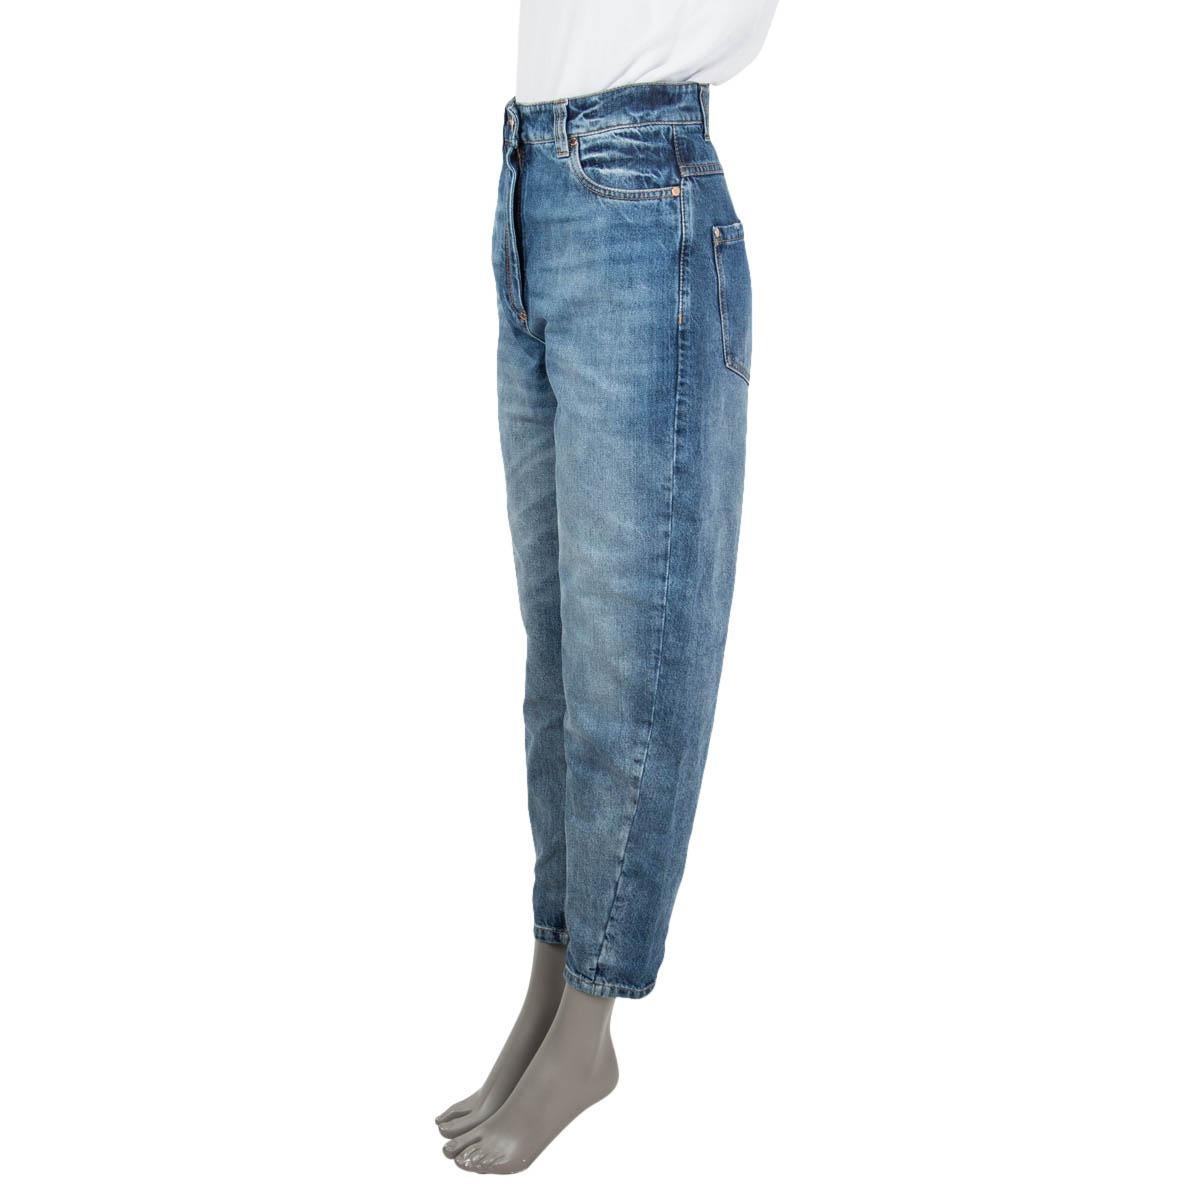 100% authentic Brunello Cucinelli 90s cut jeans in washed denim blue cotton (100%). Open with a zipper and one rose-golden button in the front. Feature a high waist cut, a loose fit, belt loops, a coin pocket and two rounded slit pockets on the